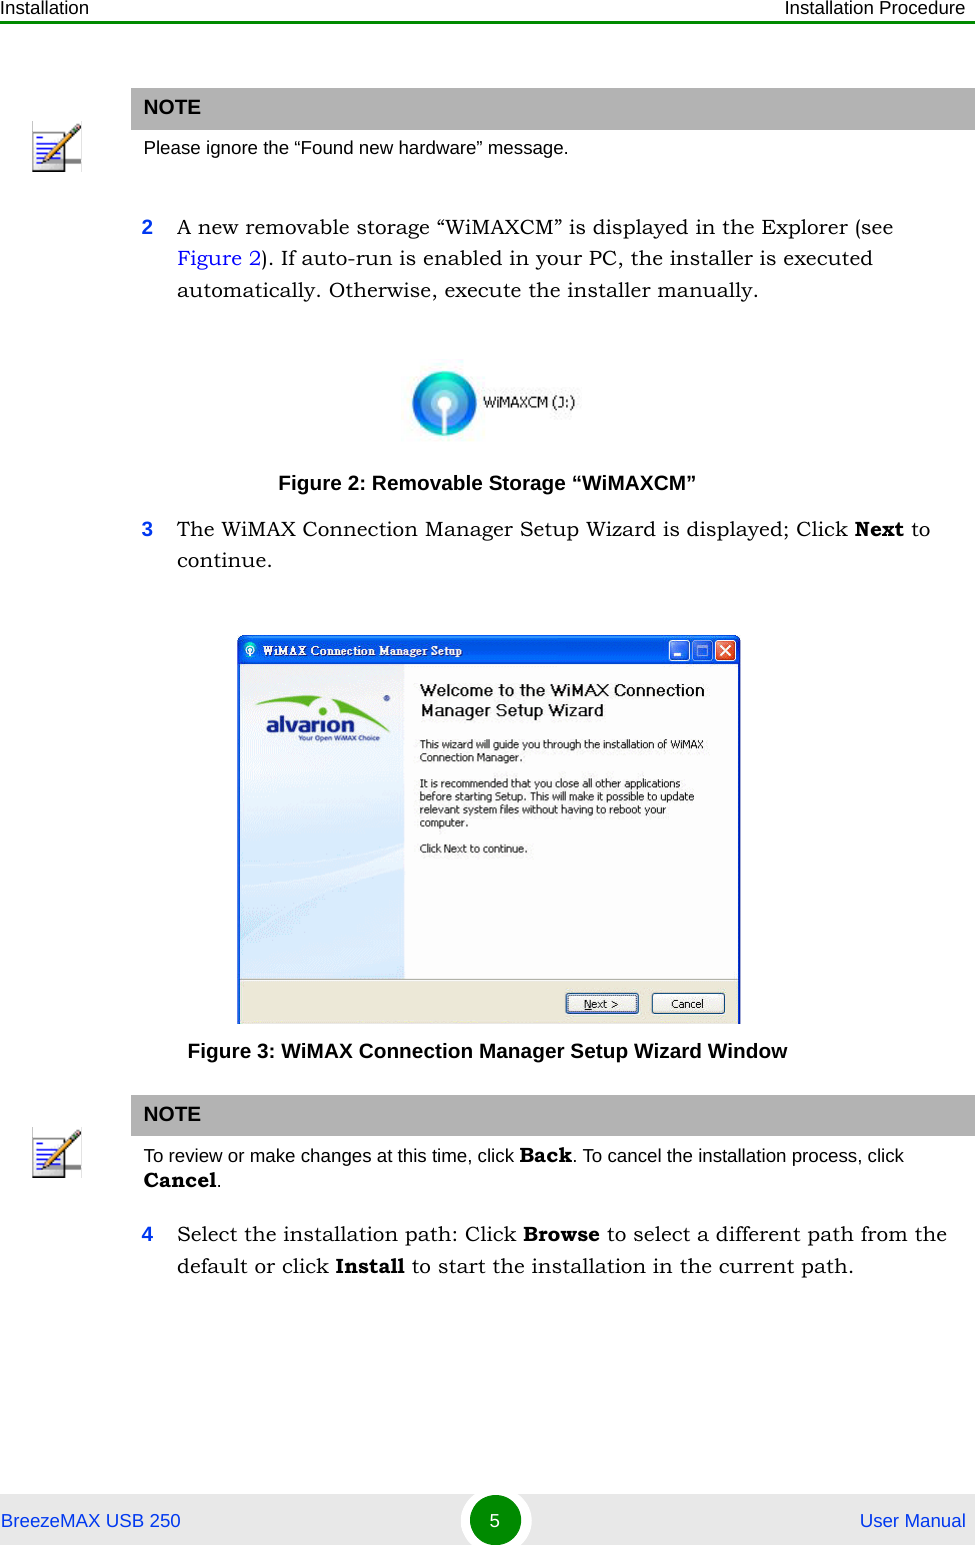 Installation Installation ProcedureBreezeMAX USB 250 5 User Manual2A new removable storage “WiMAXCM” is displayed in the Explorer (see Figure 2). If auto-run is enabled in your PC, the installer is executed automatically. Otherwise, execute the installer manually.3The WiMAX Connection Manager Setup Wizard is displayed; Click Next to continue.4Select the installation path: Click Browse to select a different path from the default or click Install to start the installation in the current path.NOTEPlease ignore the “Found new hardware” message.Figure 2: Removable Storage “WiMAXCM”Figure 3: WiMAX Connection Manager Setup Wizard WindowNOTETo review or make changes at this time, click Back. To cancel the installation process, click Cancel.